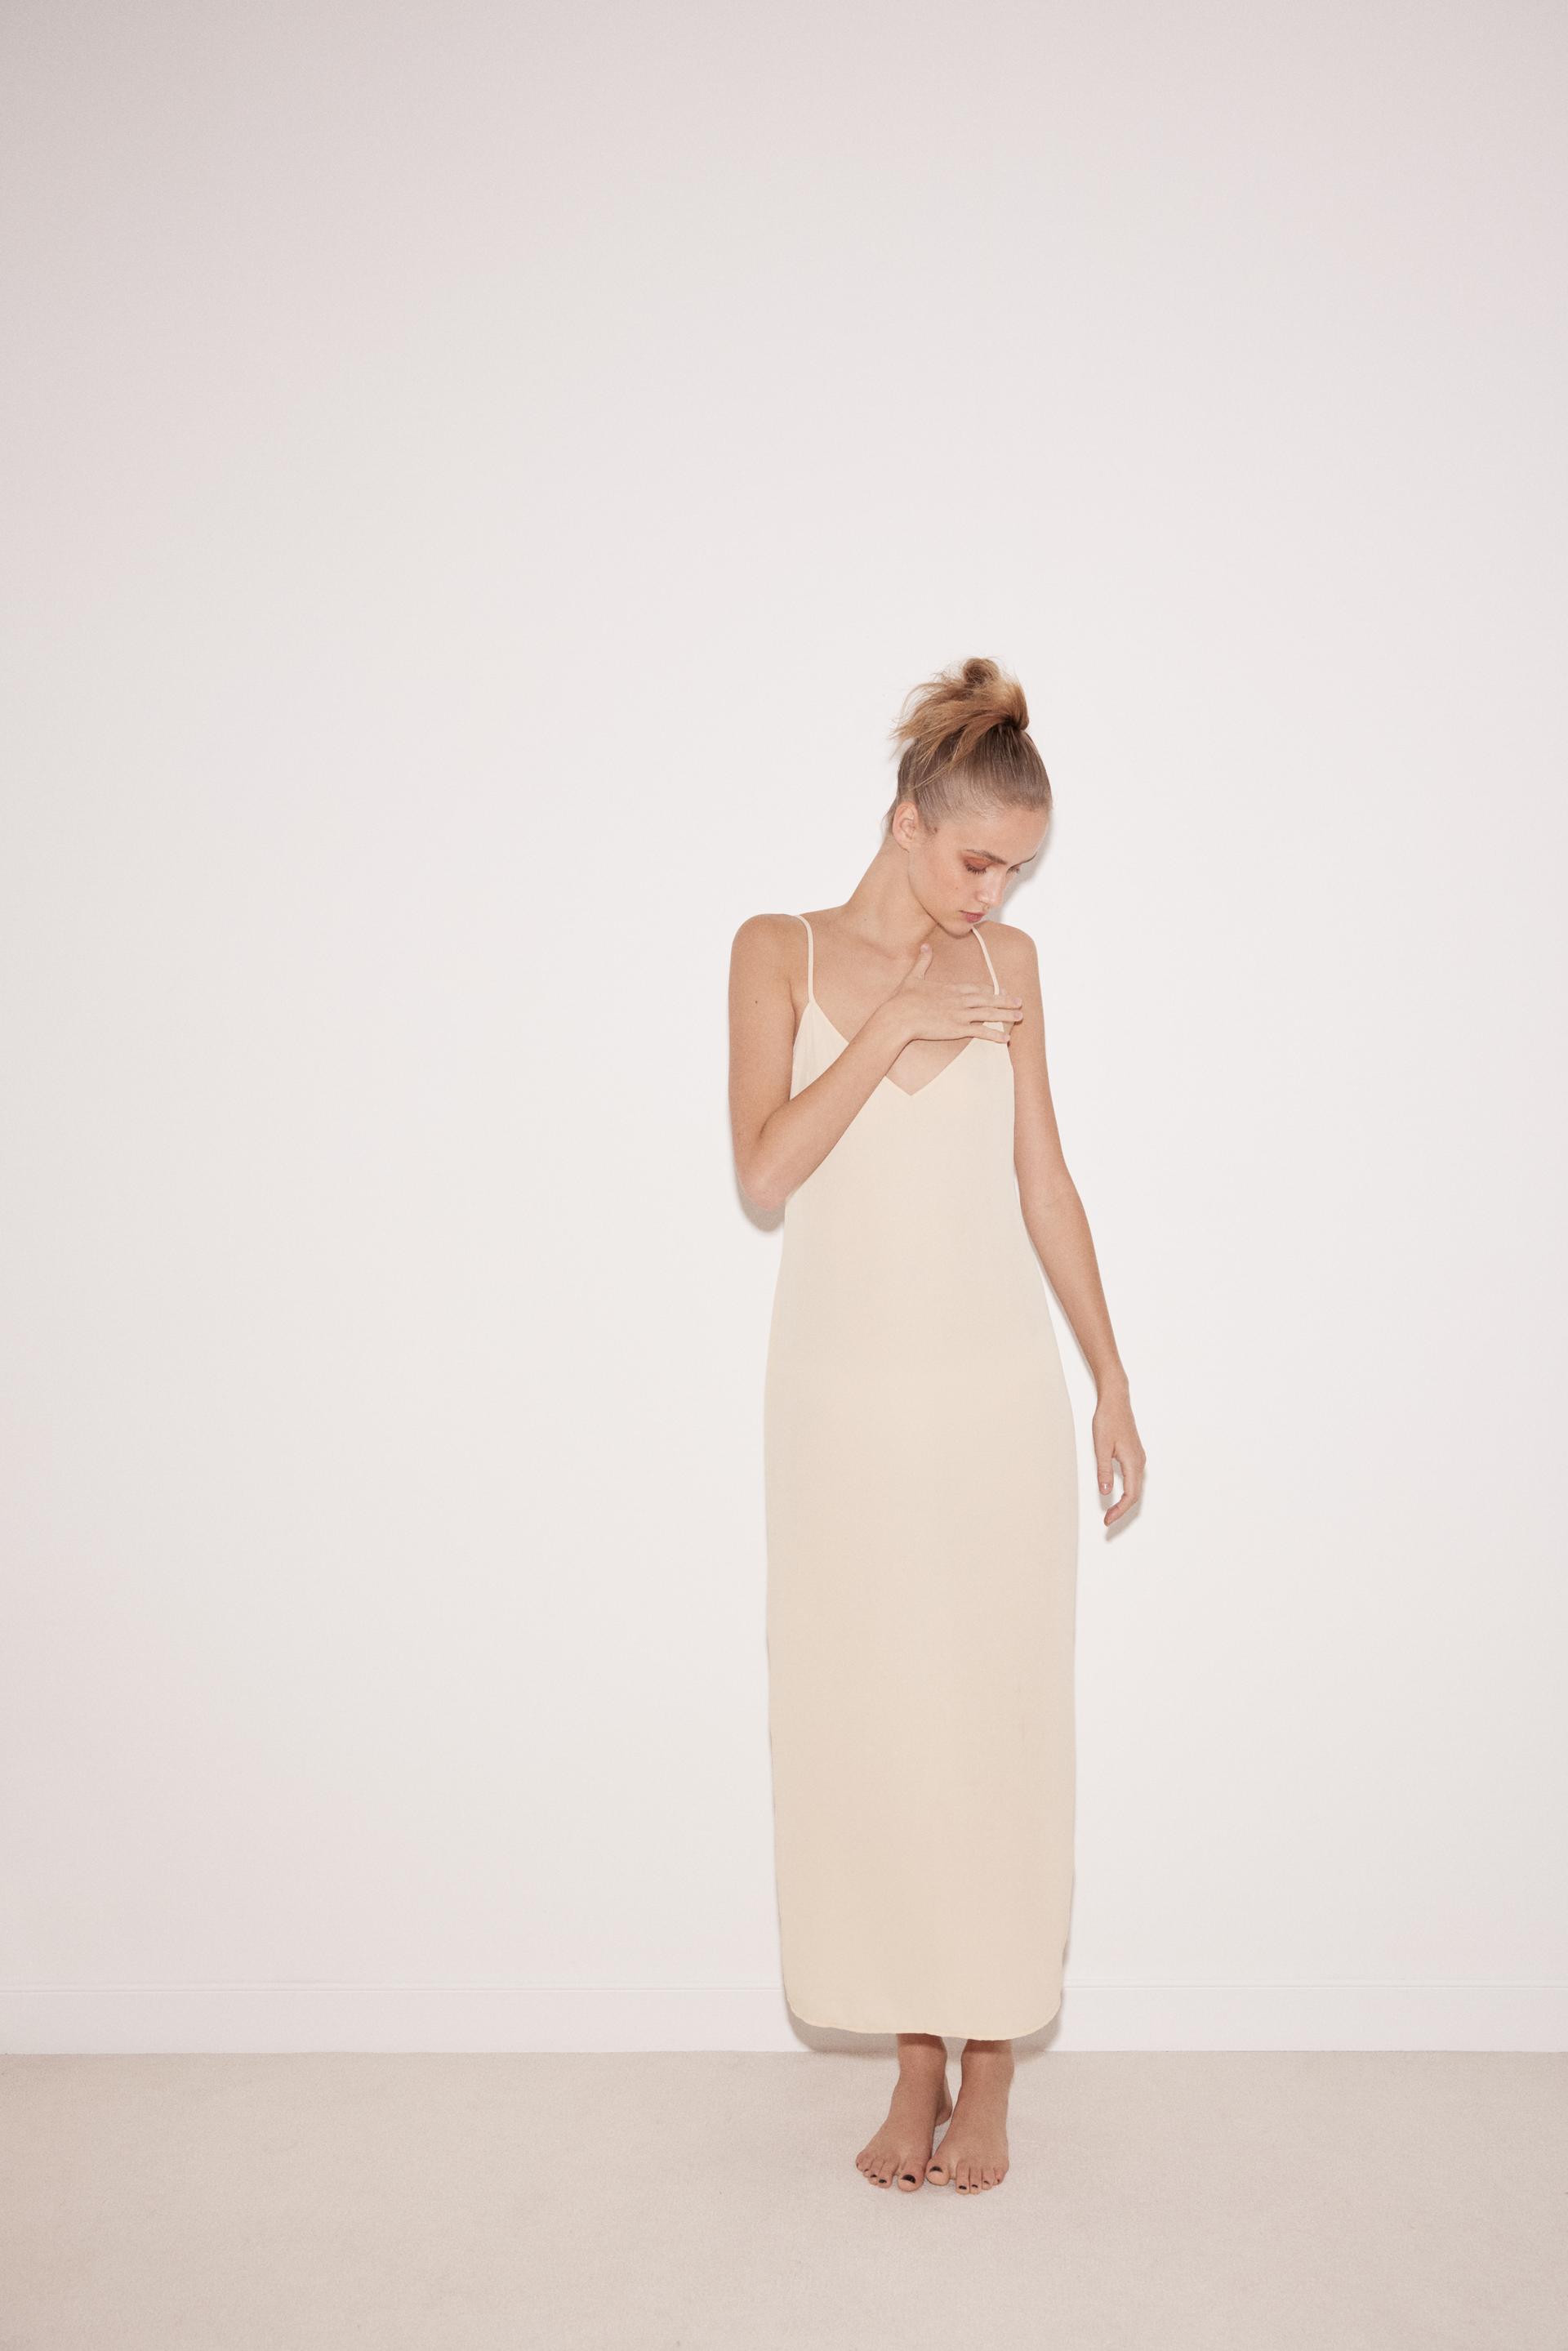 Strapless Long Cotton Slip Zara Maxi Available in White, Black or Crema  Perfect Under a Sheer Summer Long Dress XS 3XL 